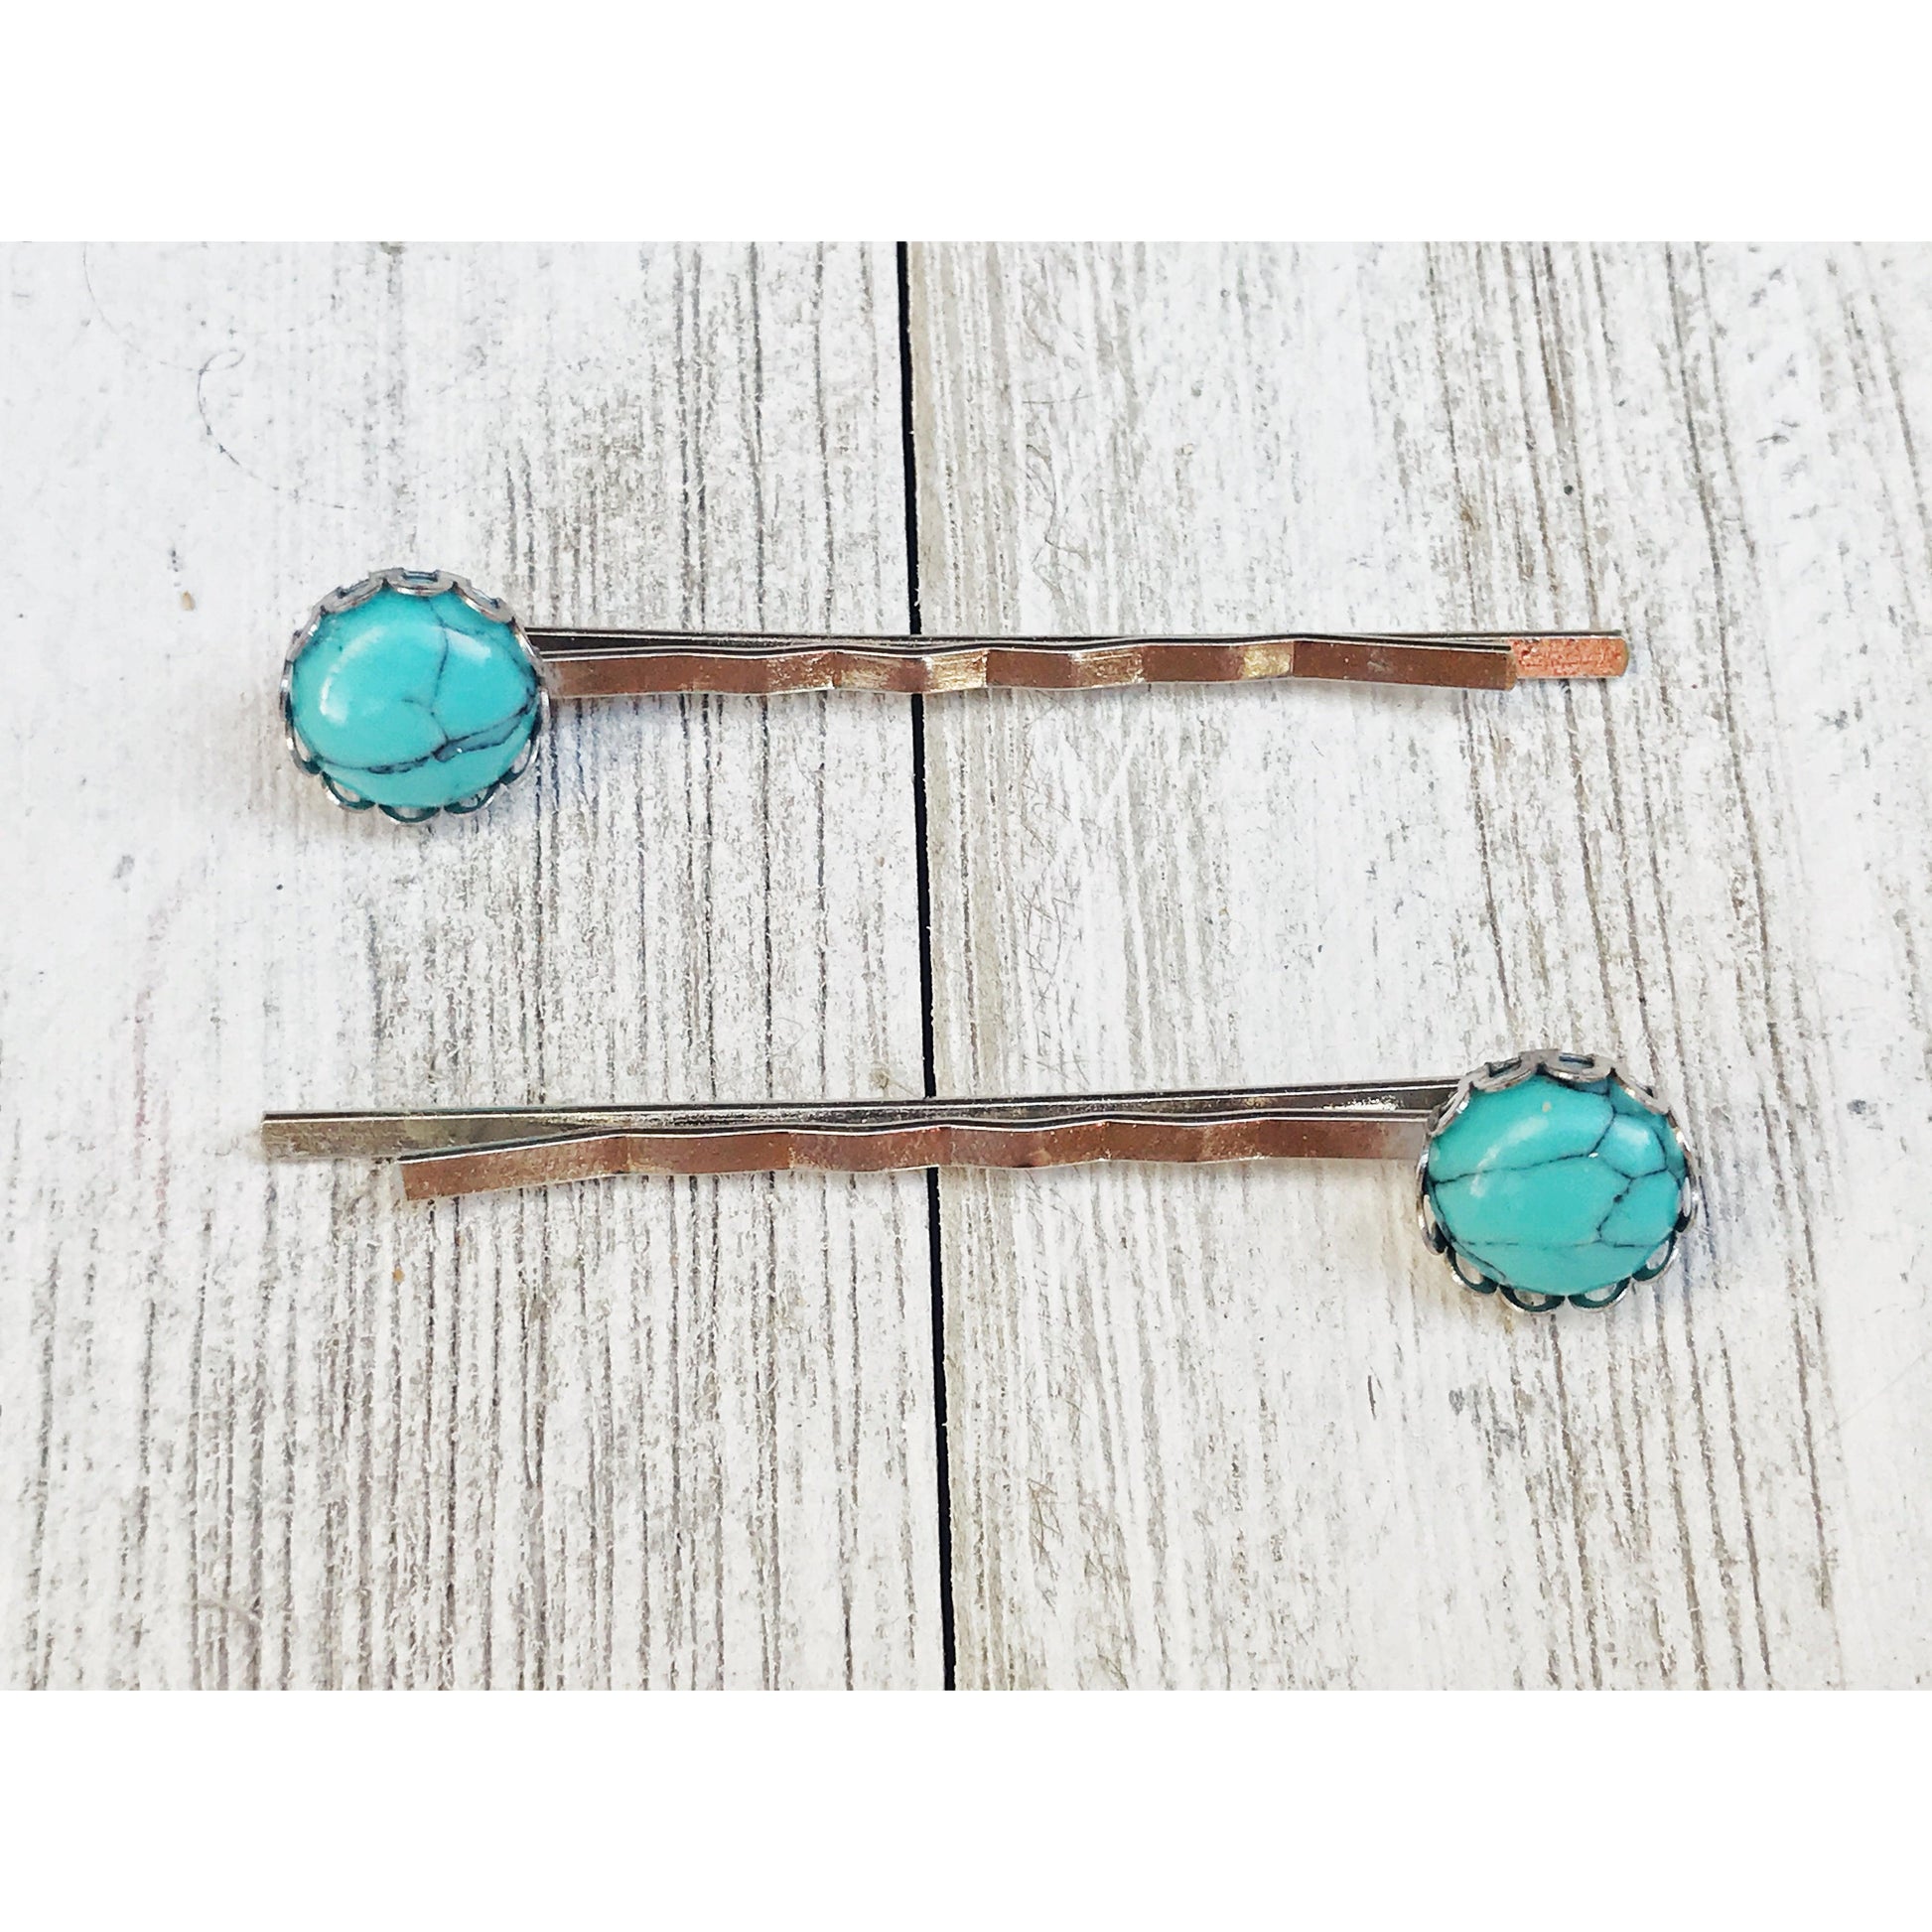 Turquoise Hair Pins - Western Silver Bobby Pins Women's Southwestern Hair Accessories